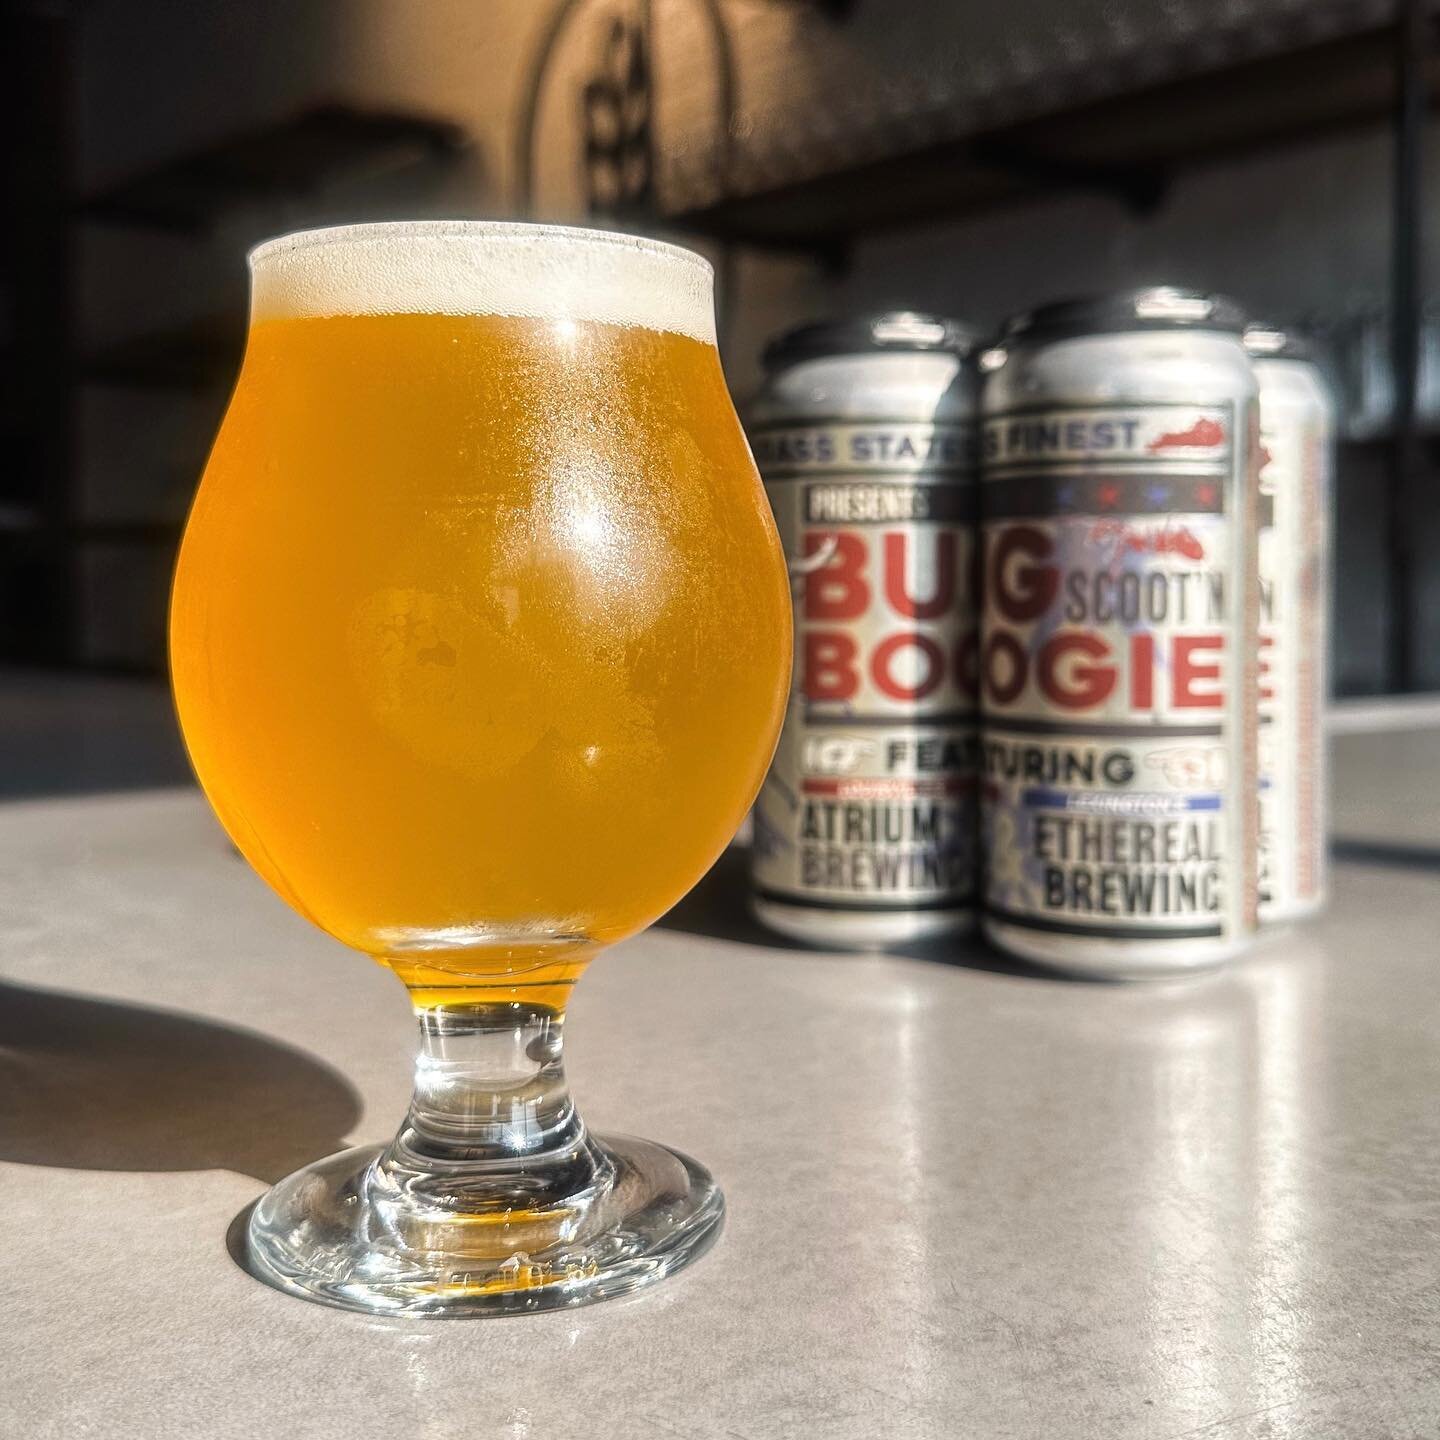 🎉NEW BEER / CAN RELEASE🎉
Today(5/17)

🐞Bug Scootin Boogie 🎸 

6.5% Sour IPA brewed with pineapple, tangerine, marshmallow and lactose. Delicately dry hopped with Citra and Sultana. Collaboration with our pals at @ethereal_brewing . 

Bright &amp;